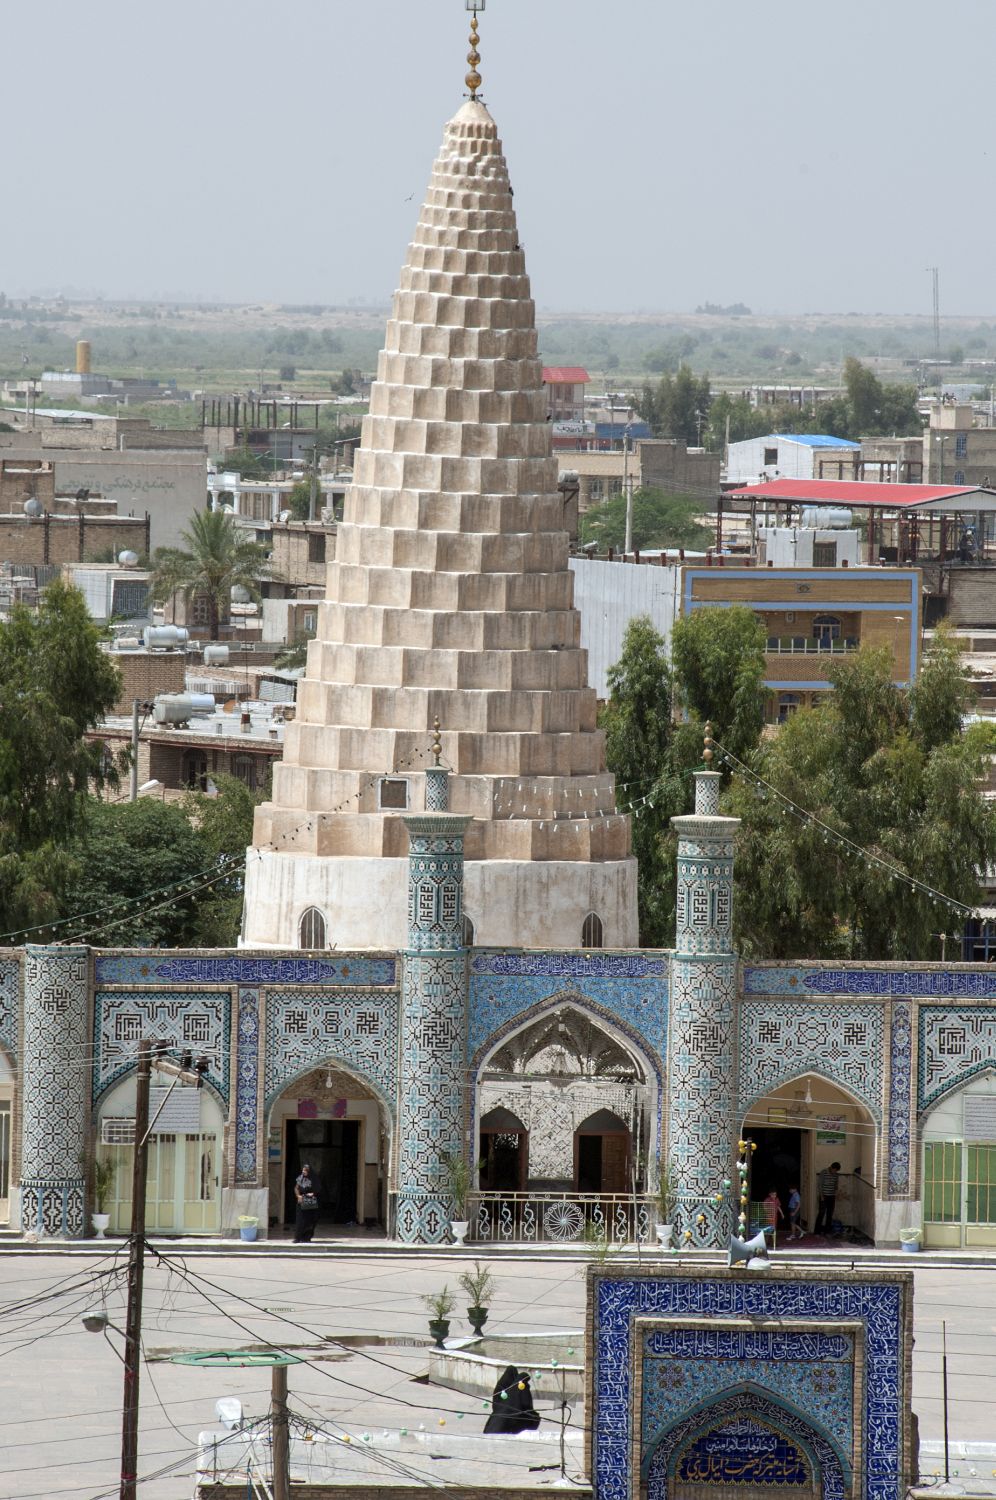 View from east overlooking forecourt with muqarnas dome in background.